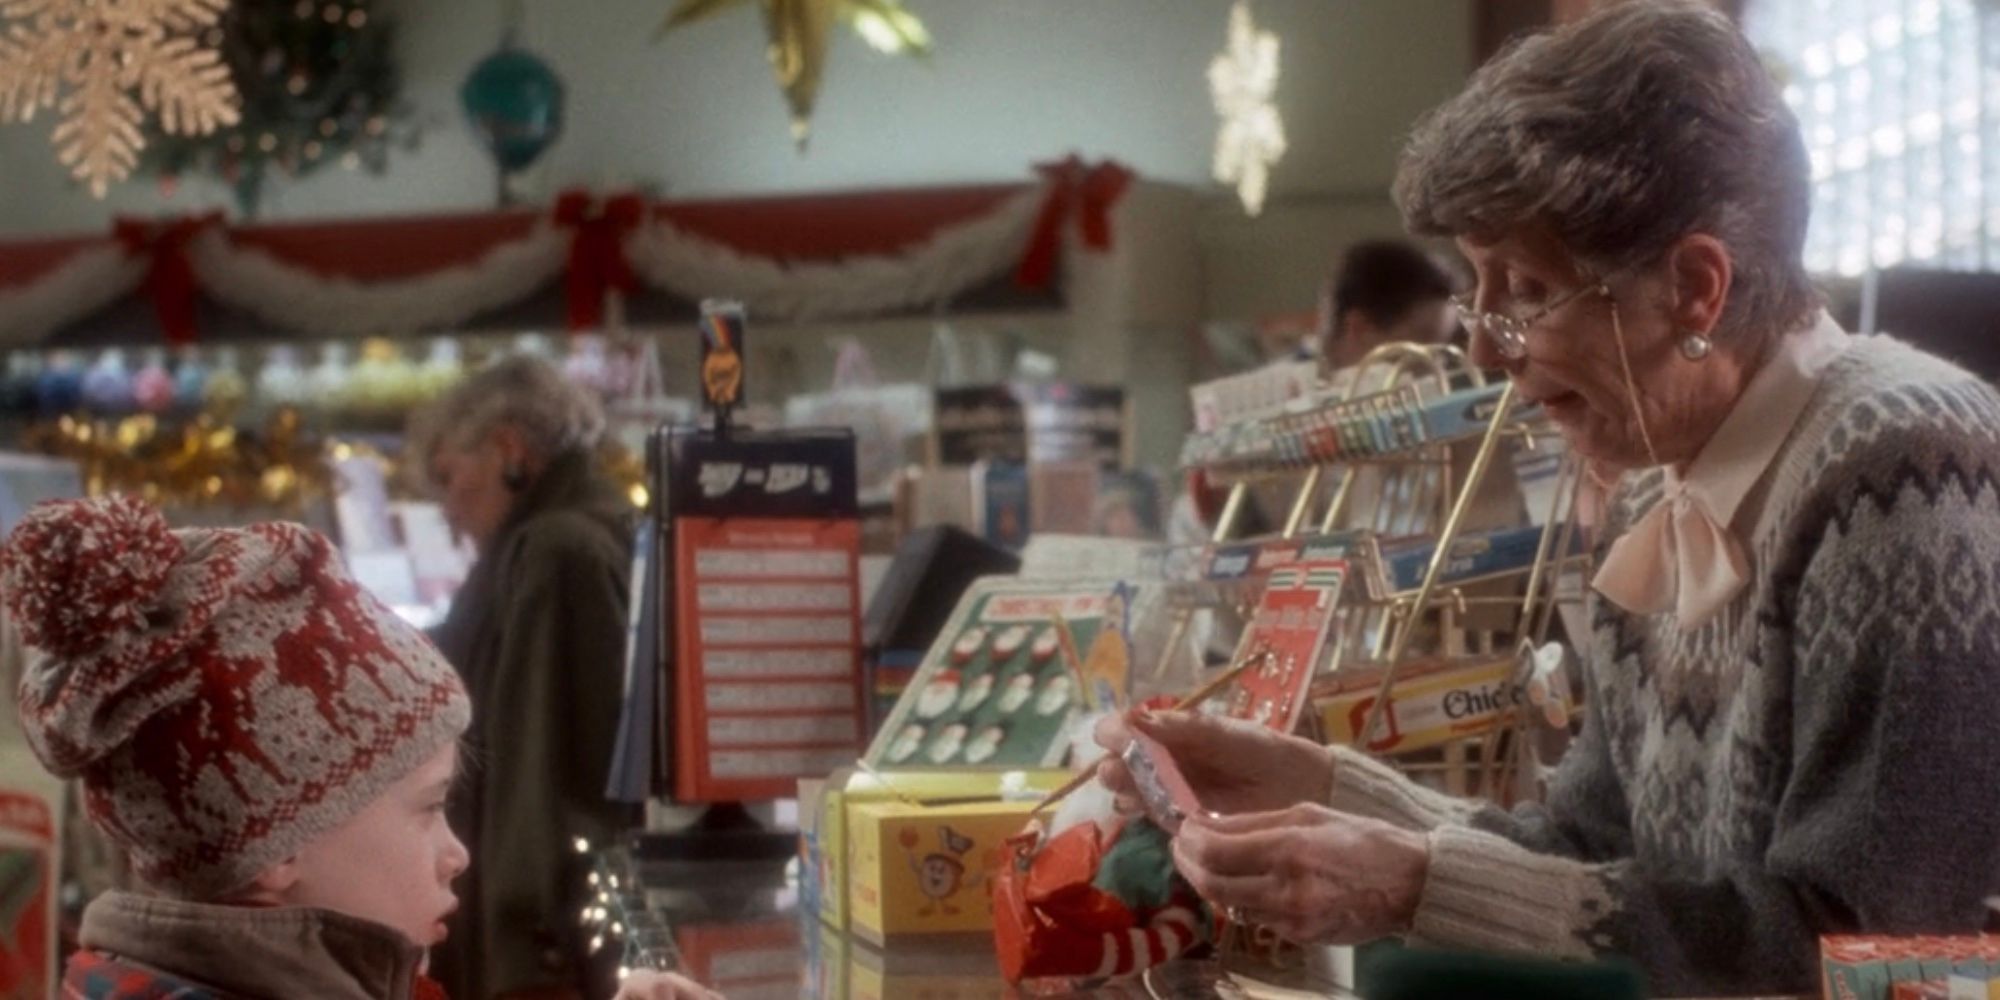 Macaulay Culkin as Kevin McCallister at the pharmacy in Home Alone